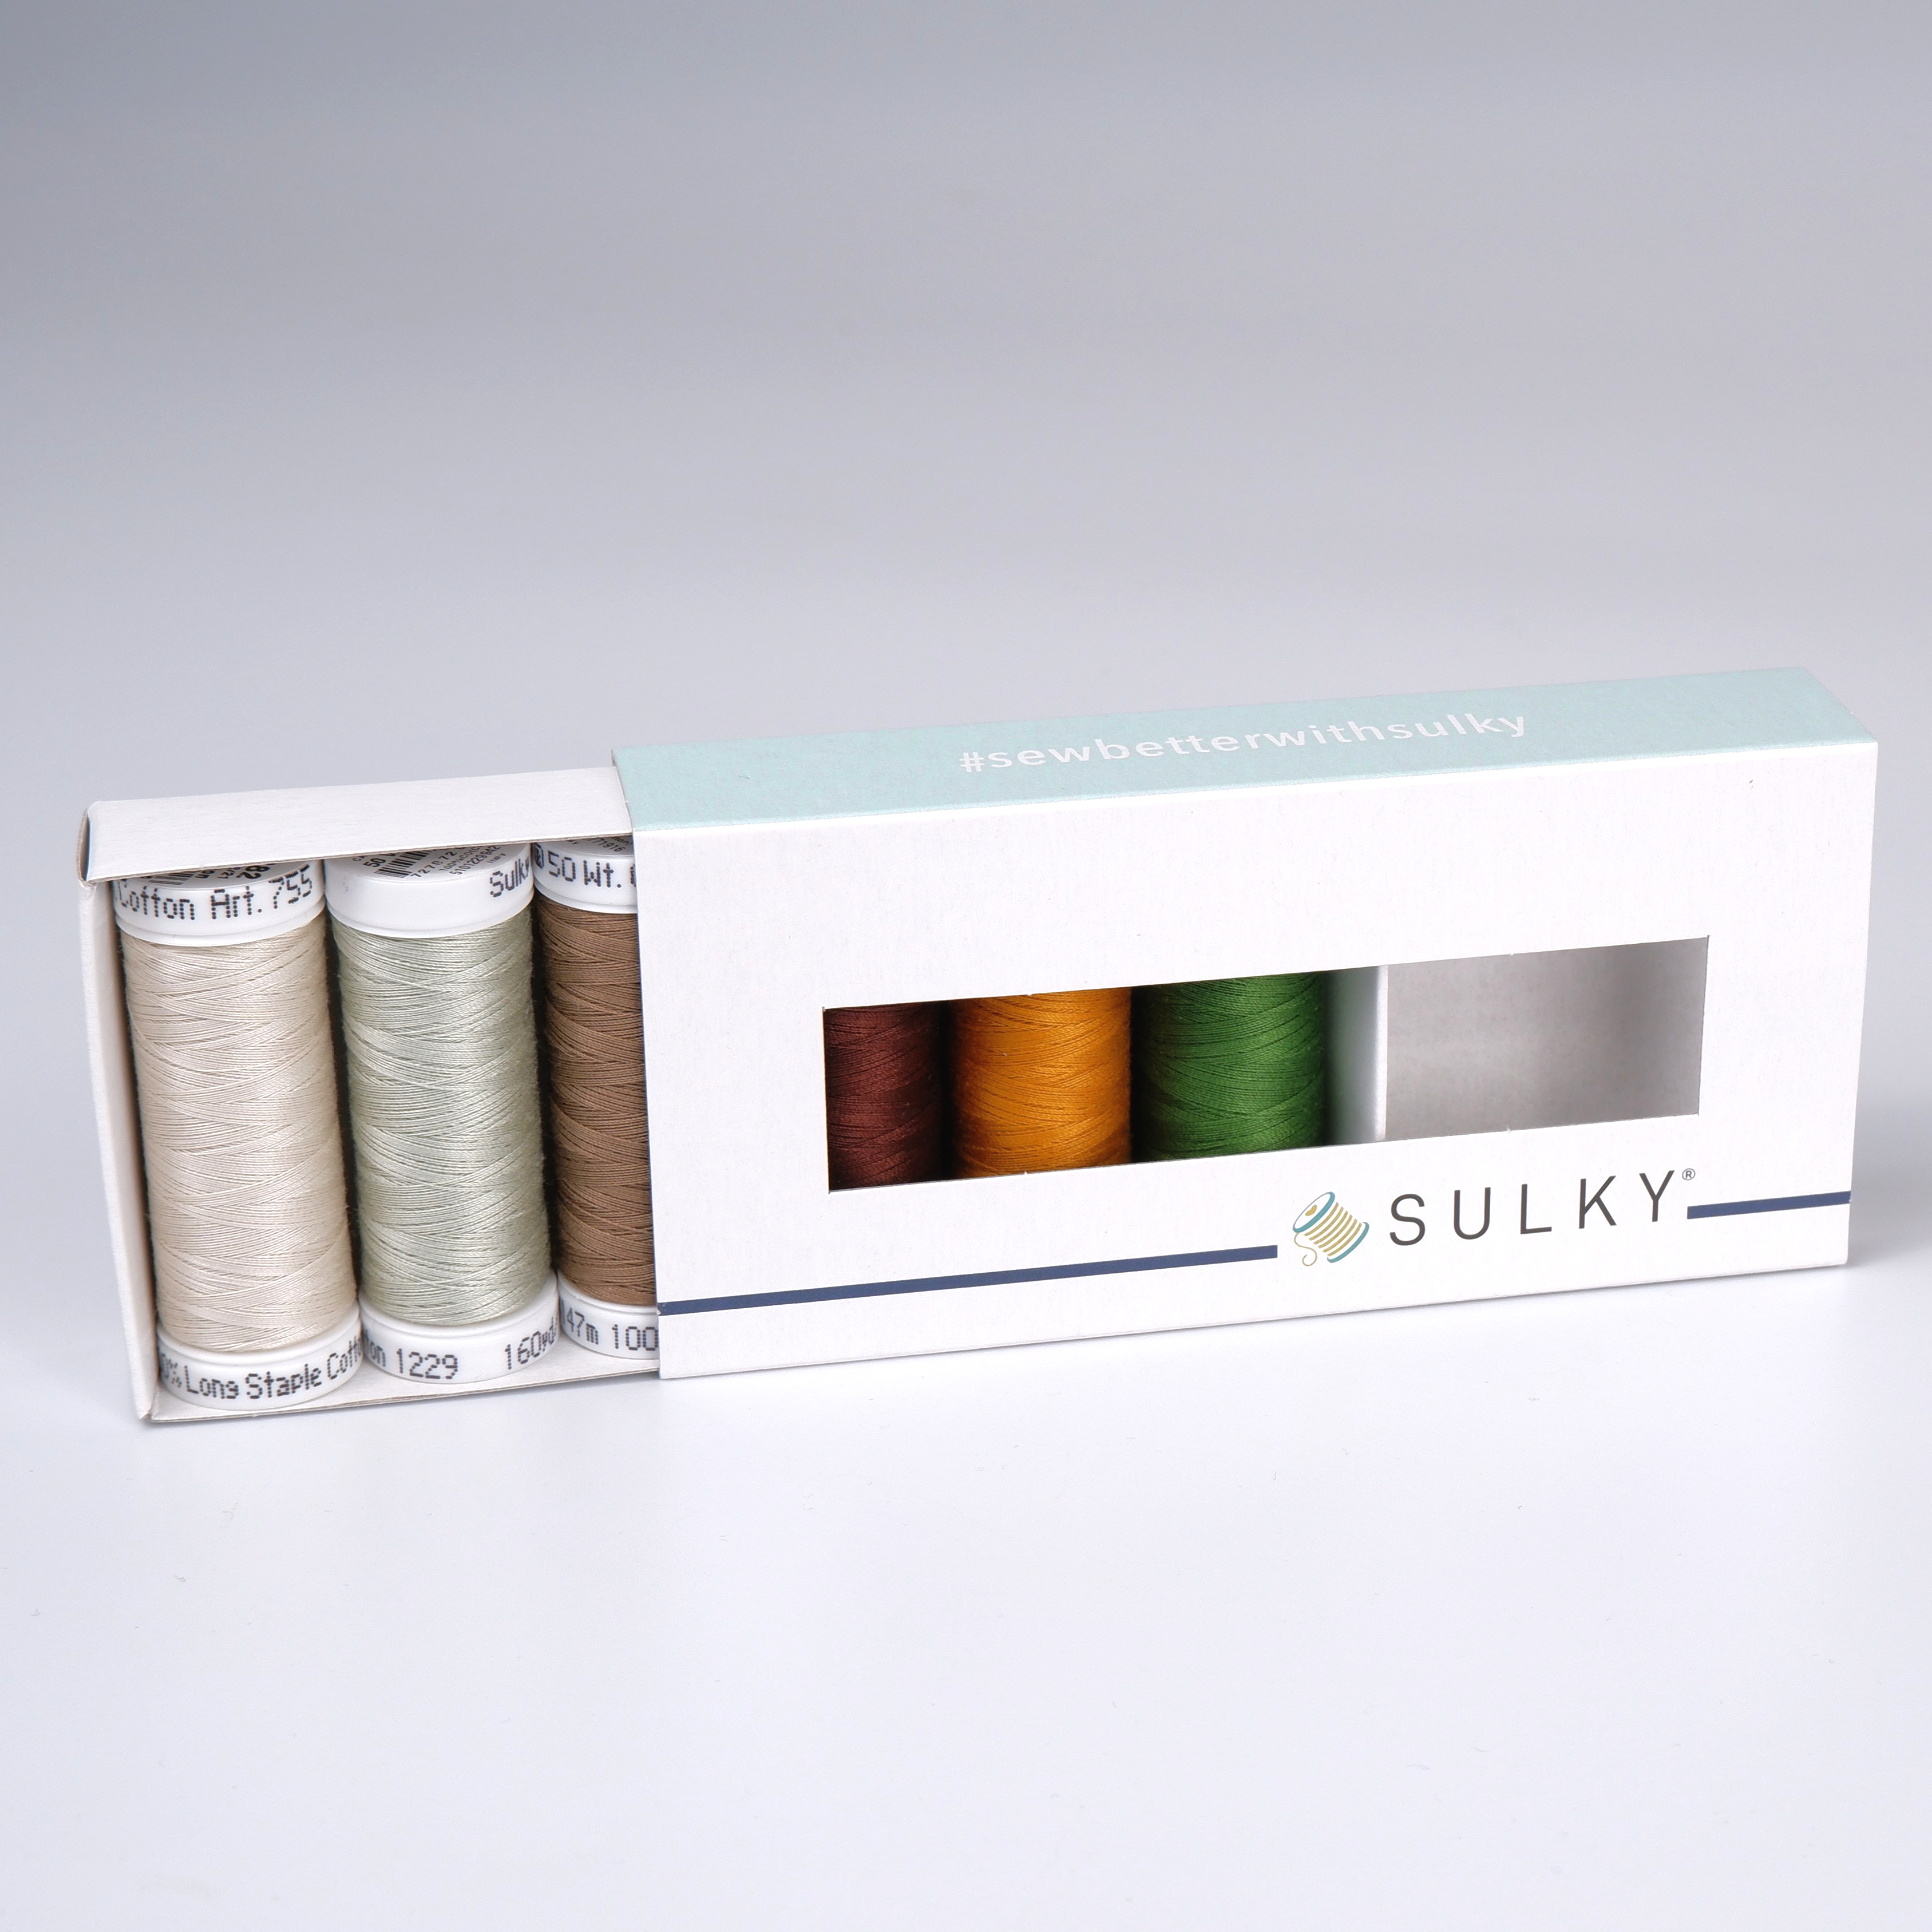 SULKY COTTON 50 - FOREST AND FAUNA 2
(6x 147m Snap Spools)